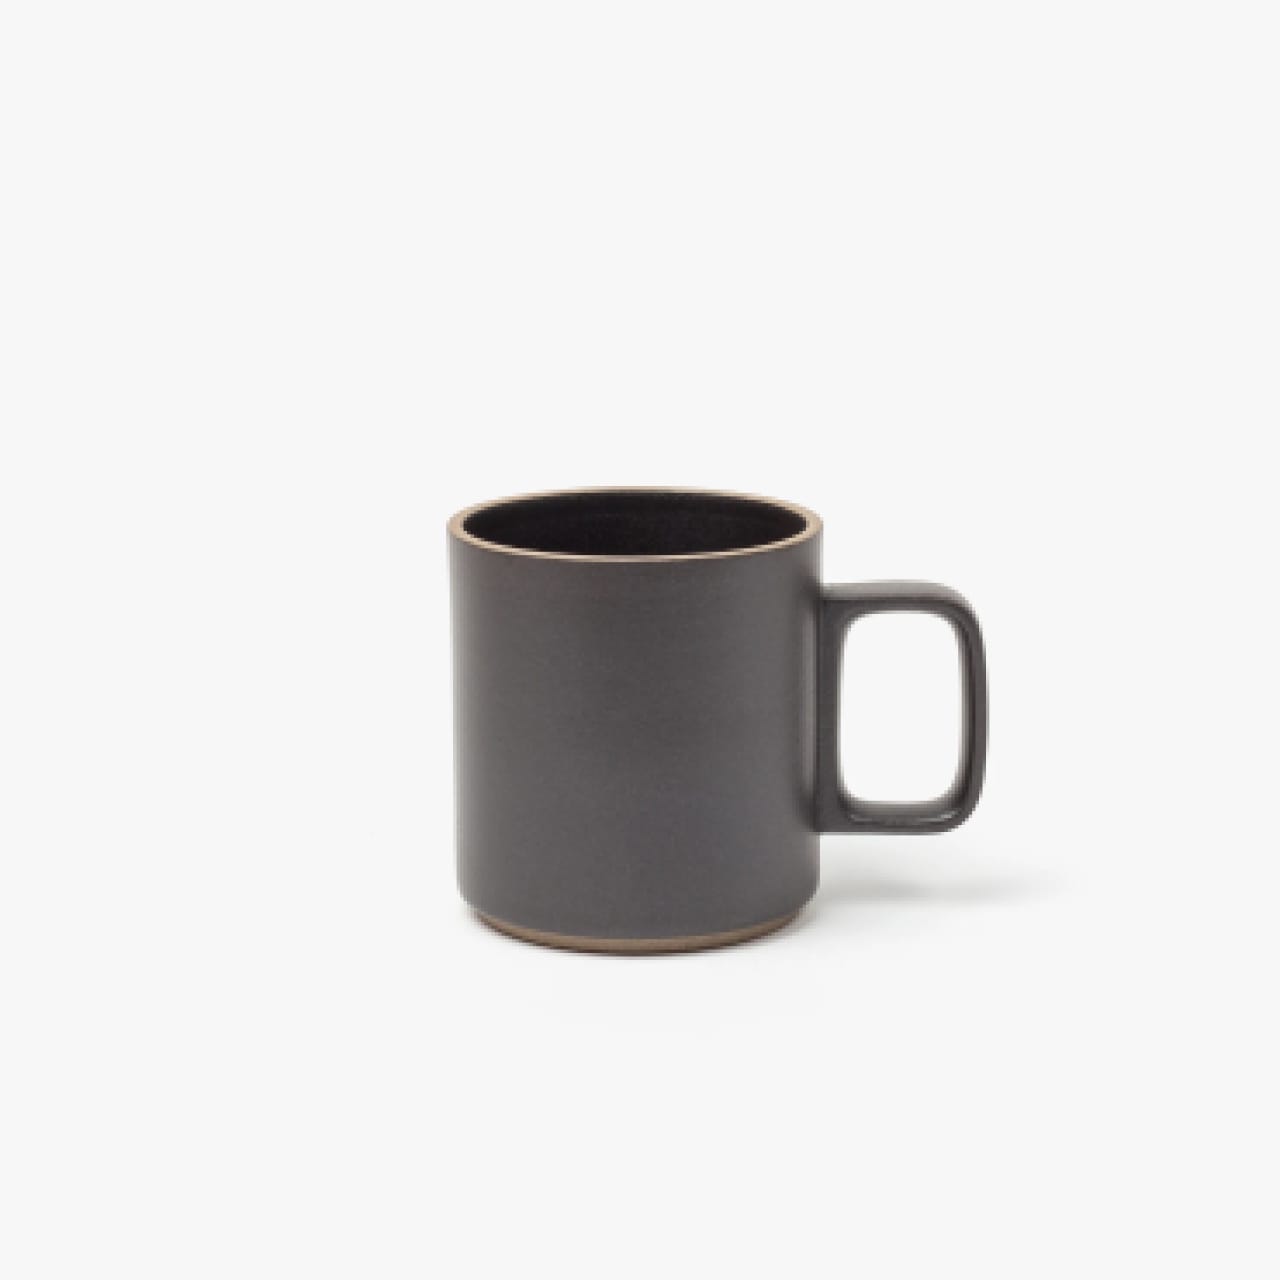 Black porcelain mug with modern square handle and natural clay accents on rim and bottom.